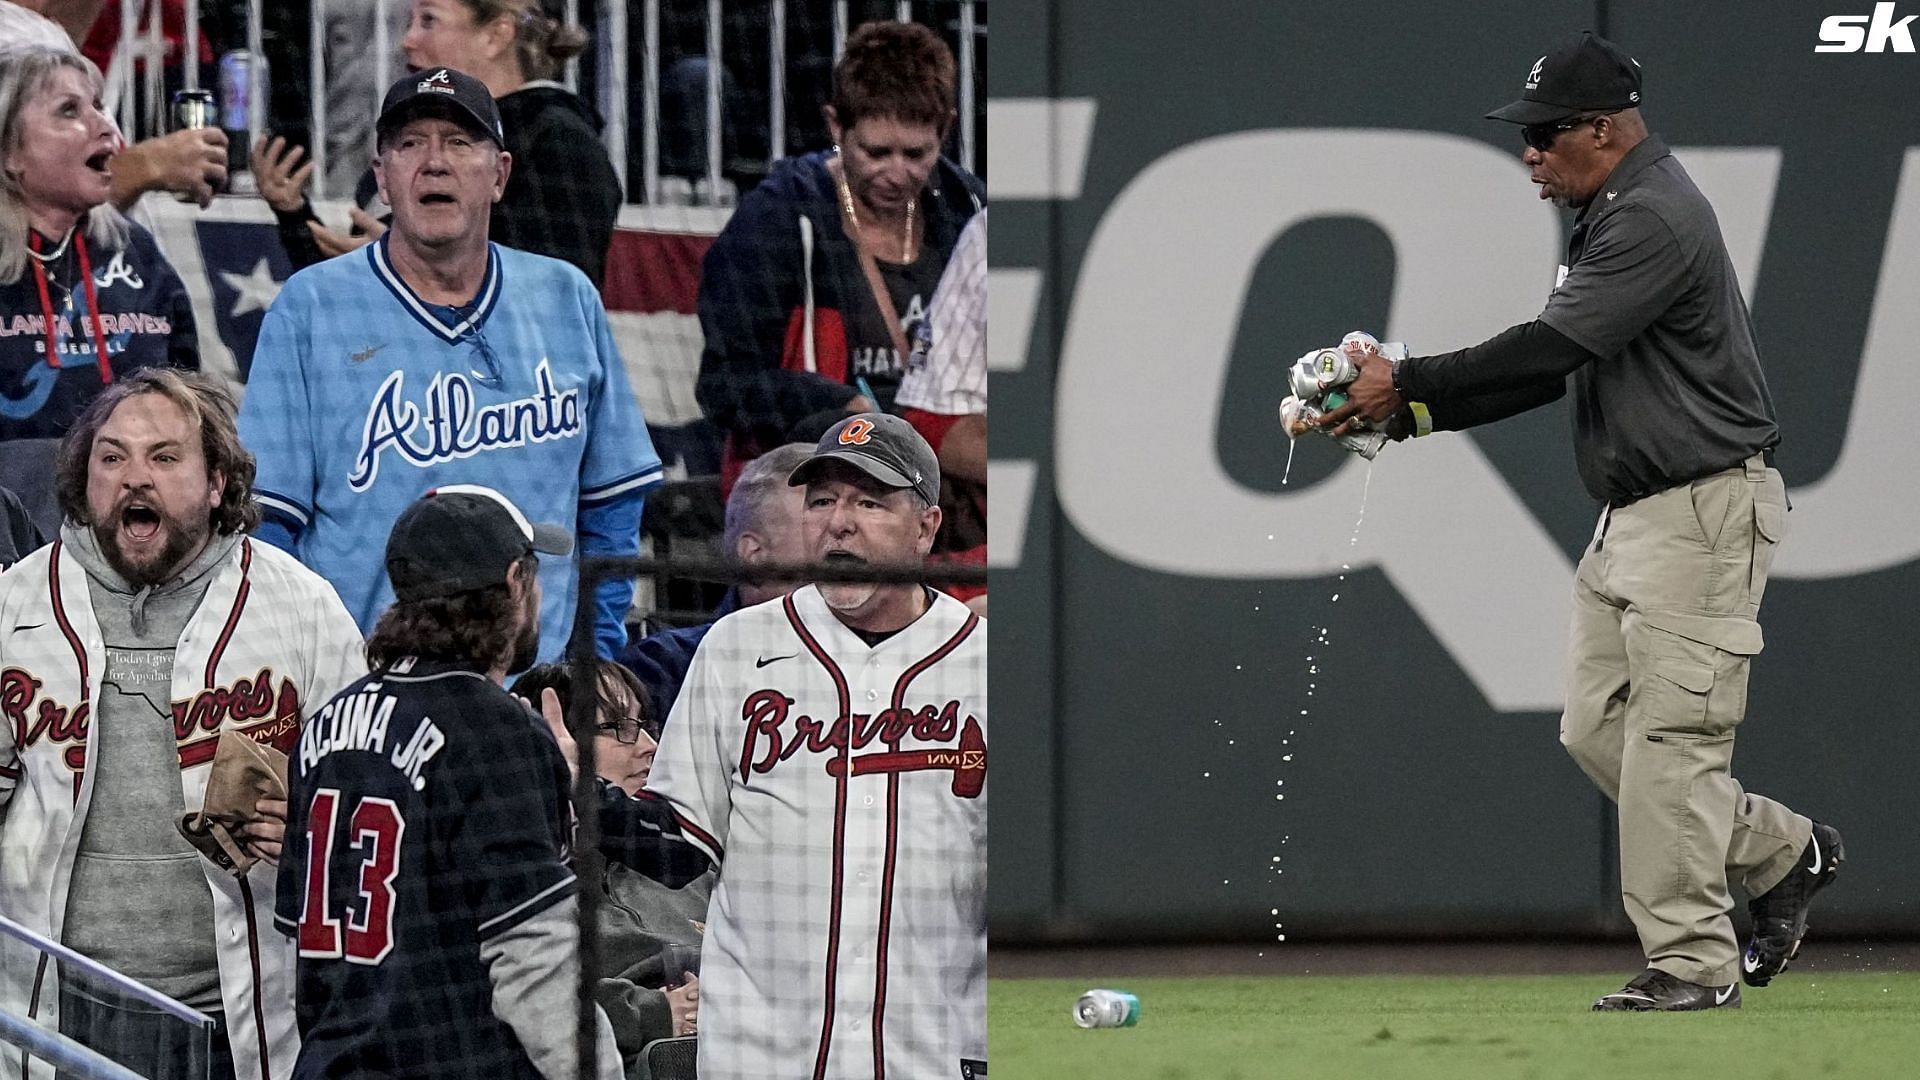 Braves fans are furious at MLB for ridiculous NLDS start times